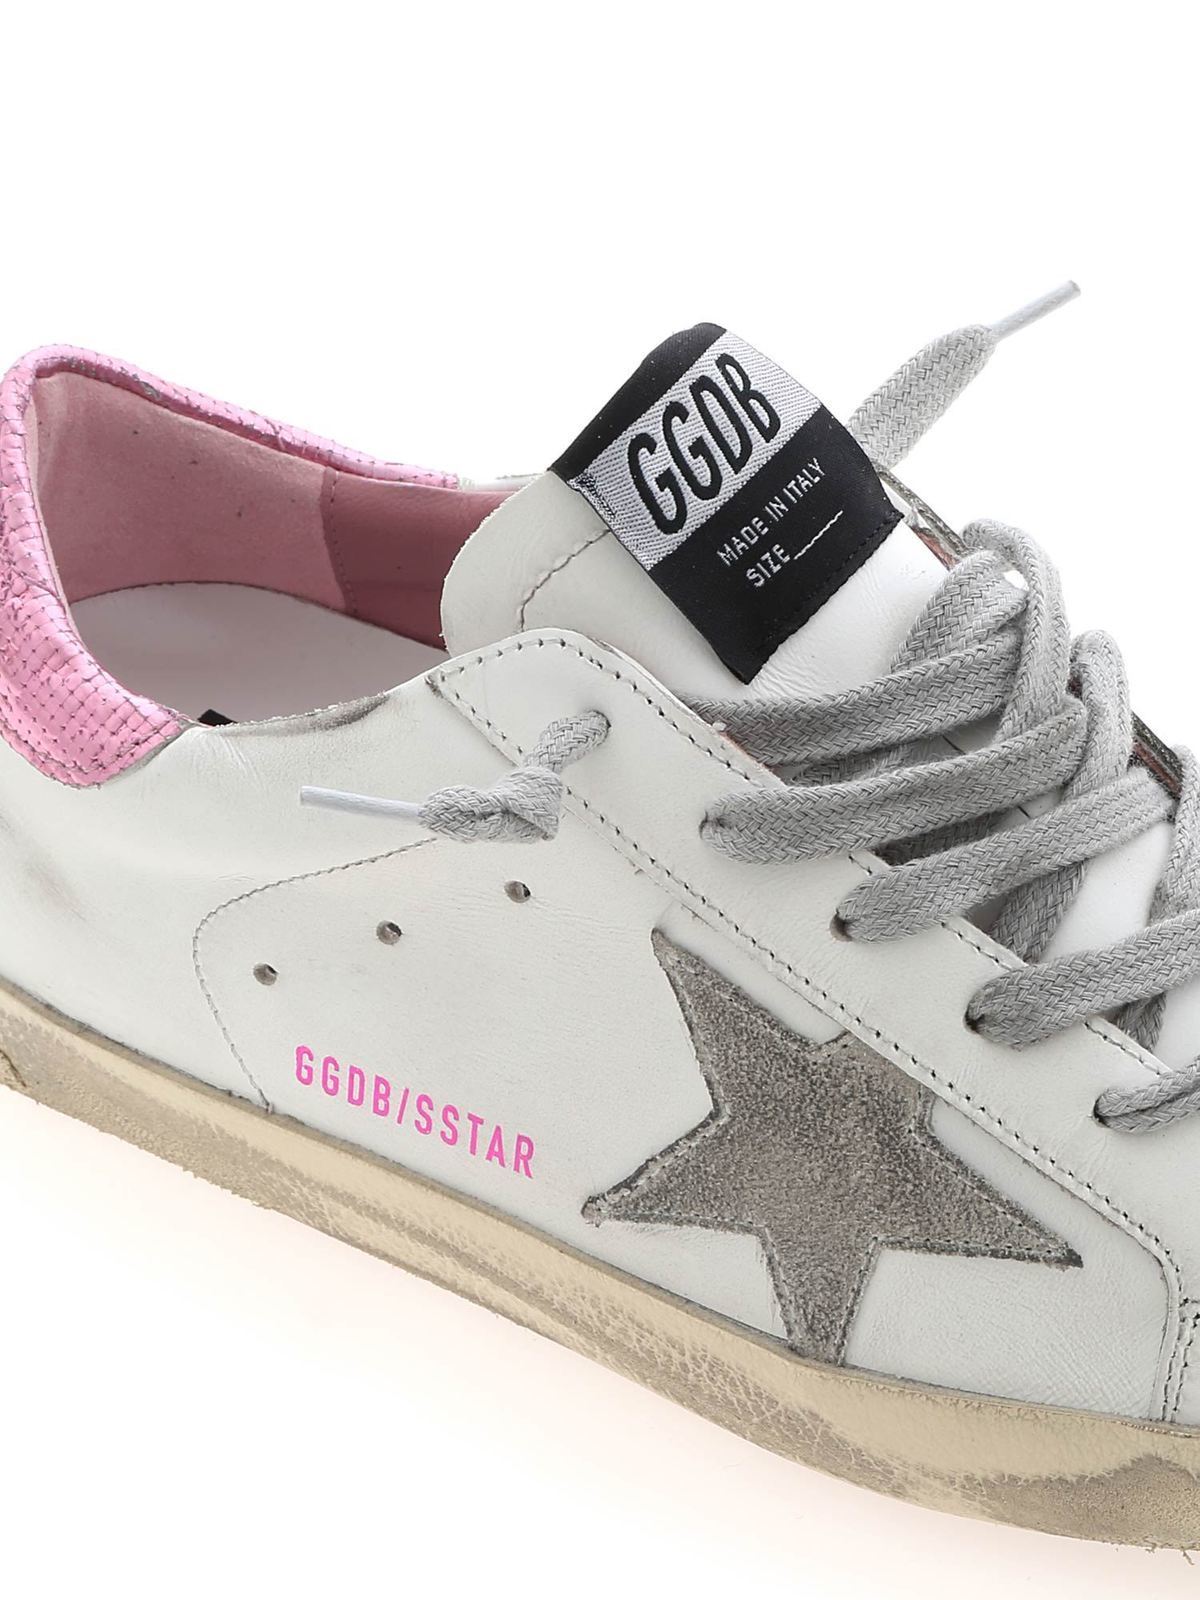 Trainers Golden - Superstar Classic sneakers in white and pink - GWF00102F00071510386